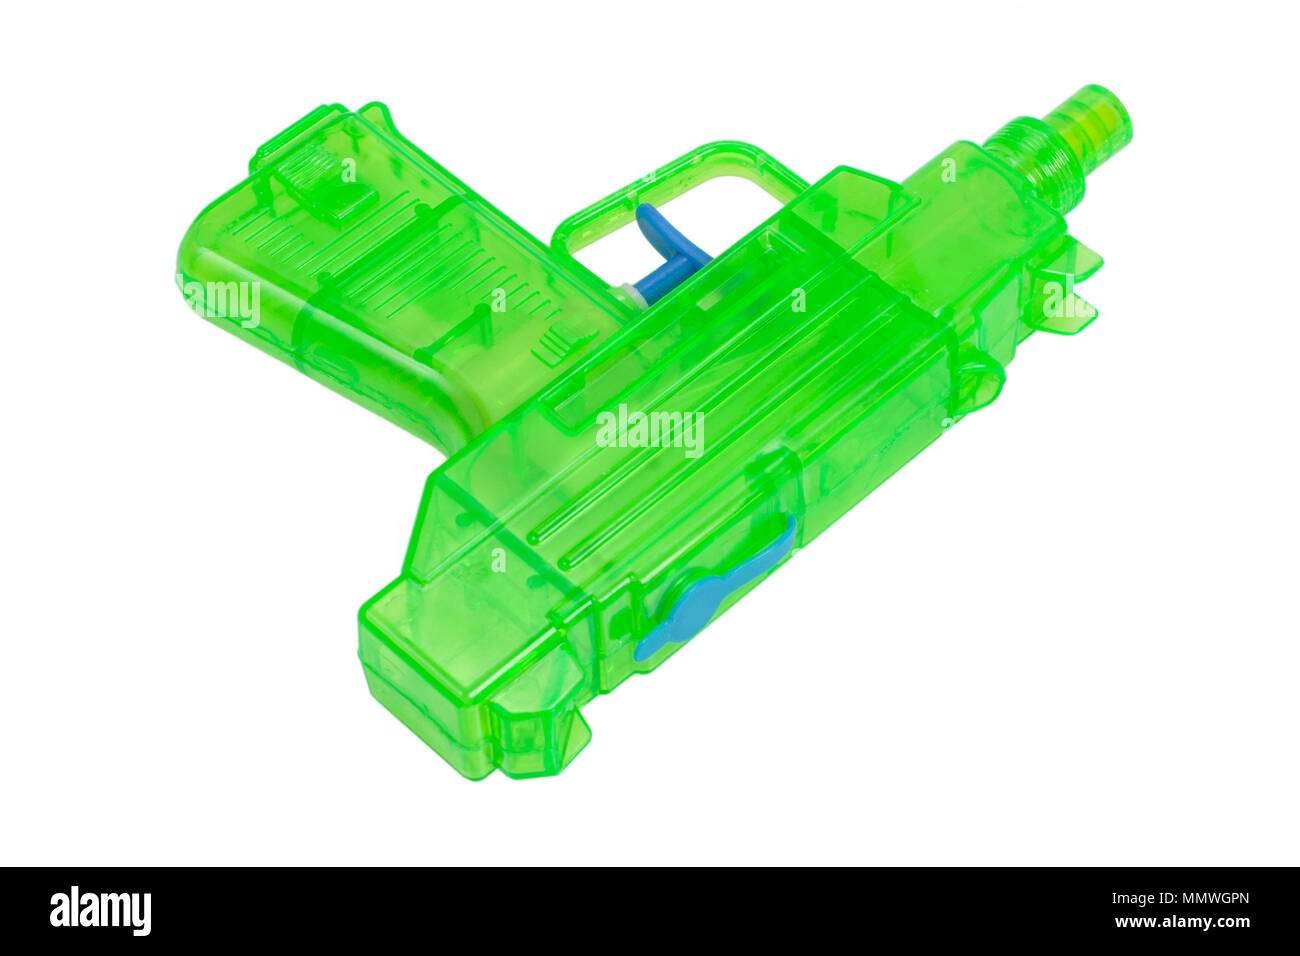 Green plastic water pistol isolated on a white background Stock Photo